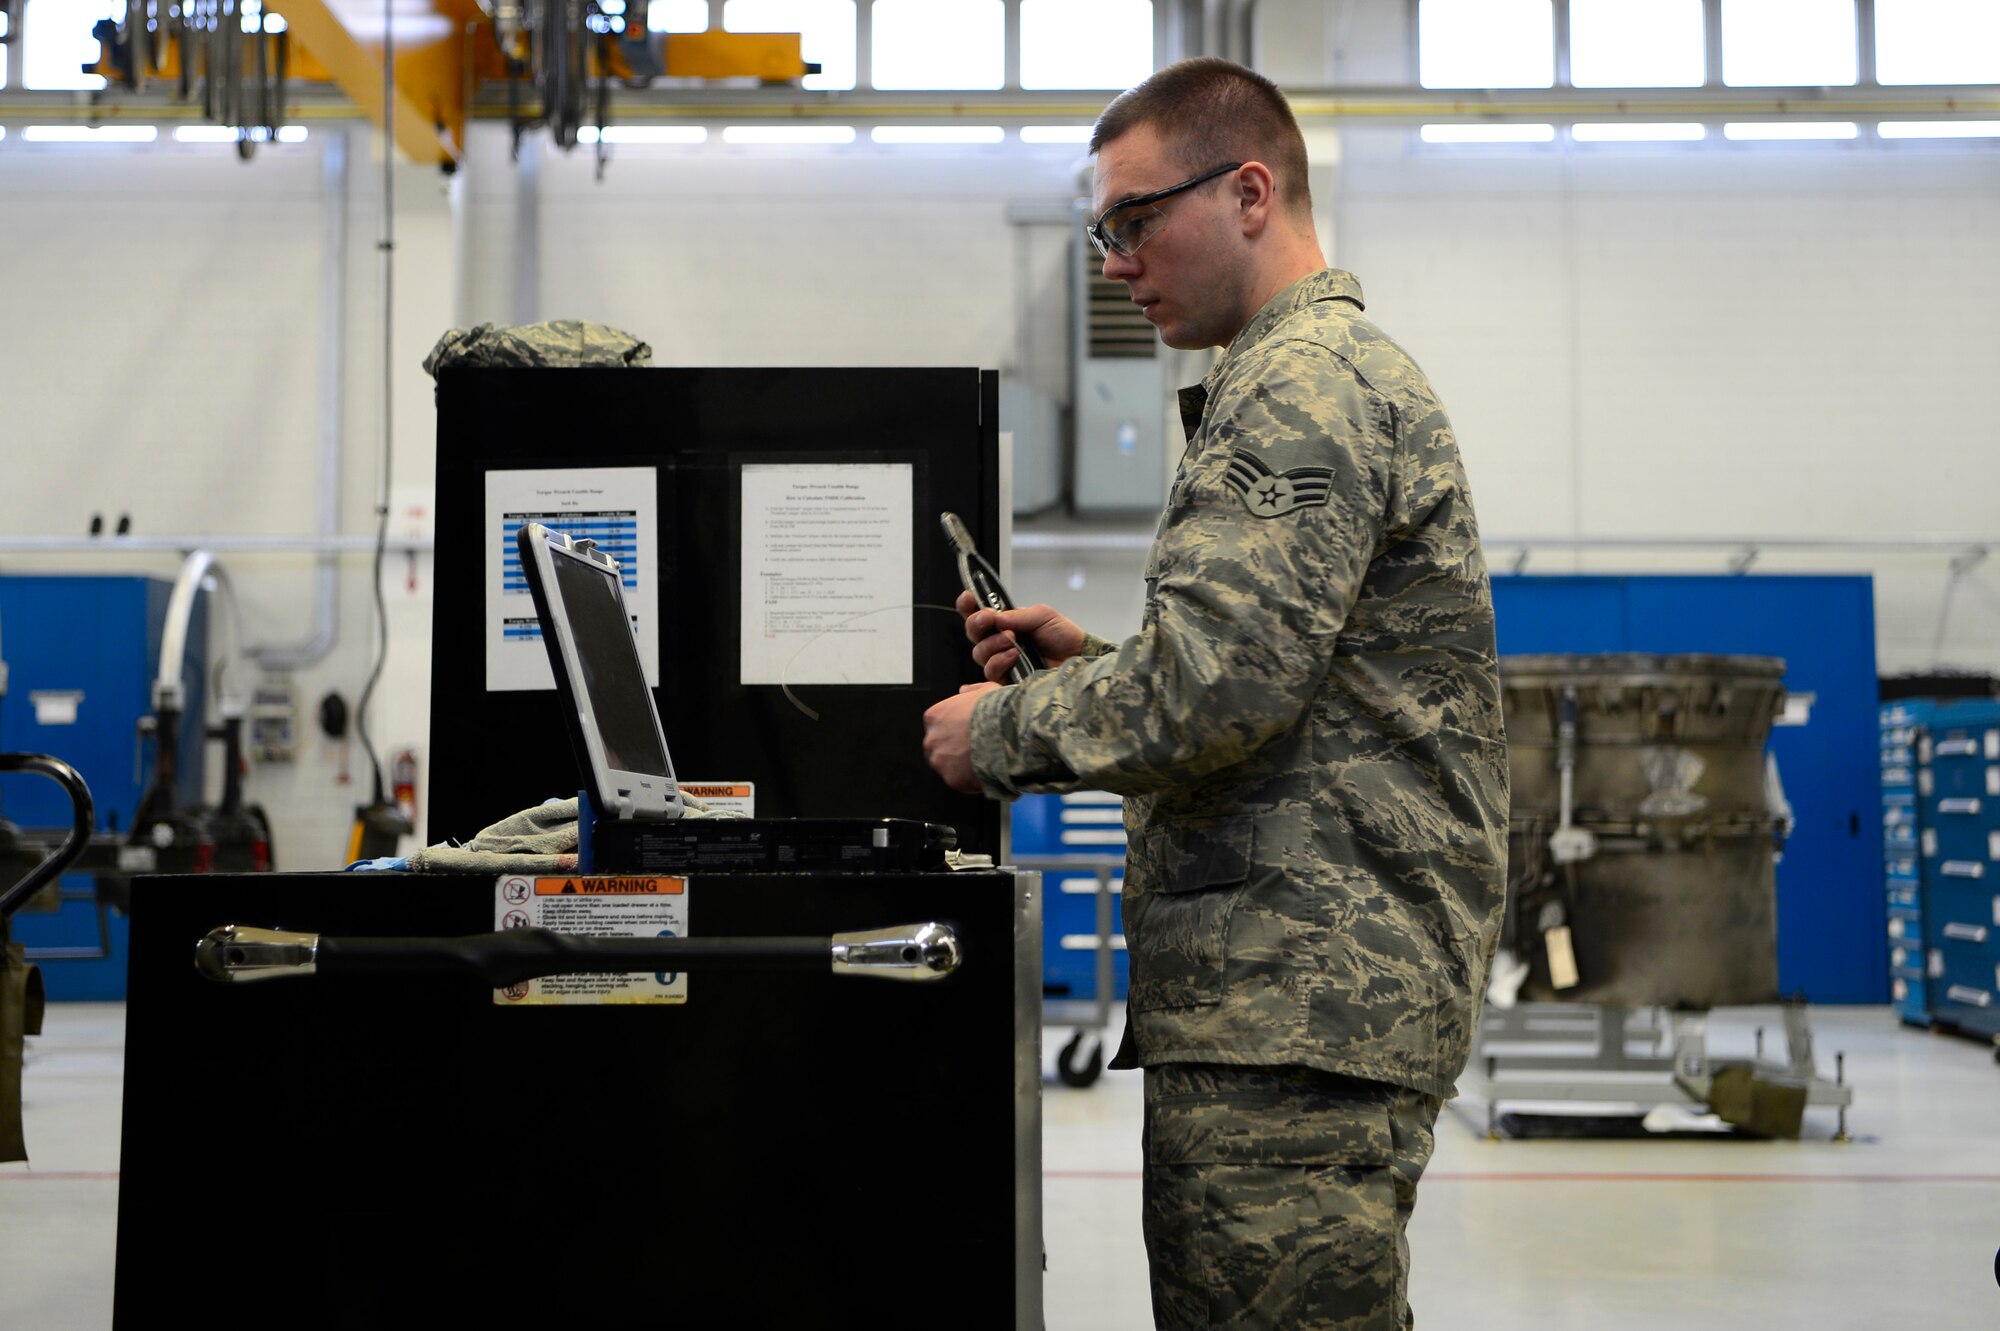 The Techdata computer, displays step-by-step instructions on how to fix an F-16 engine.